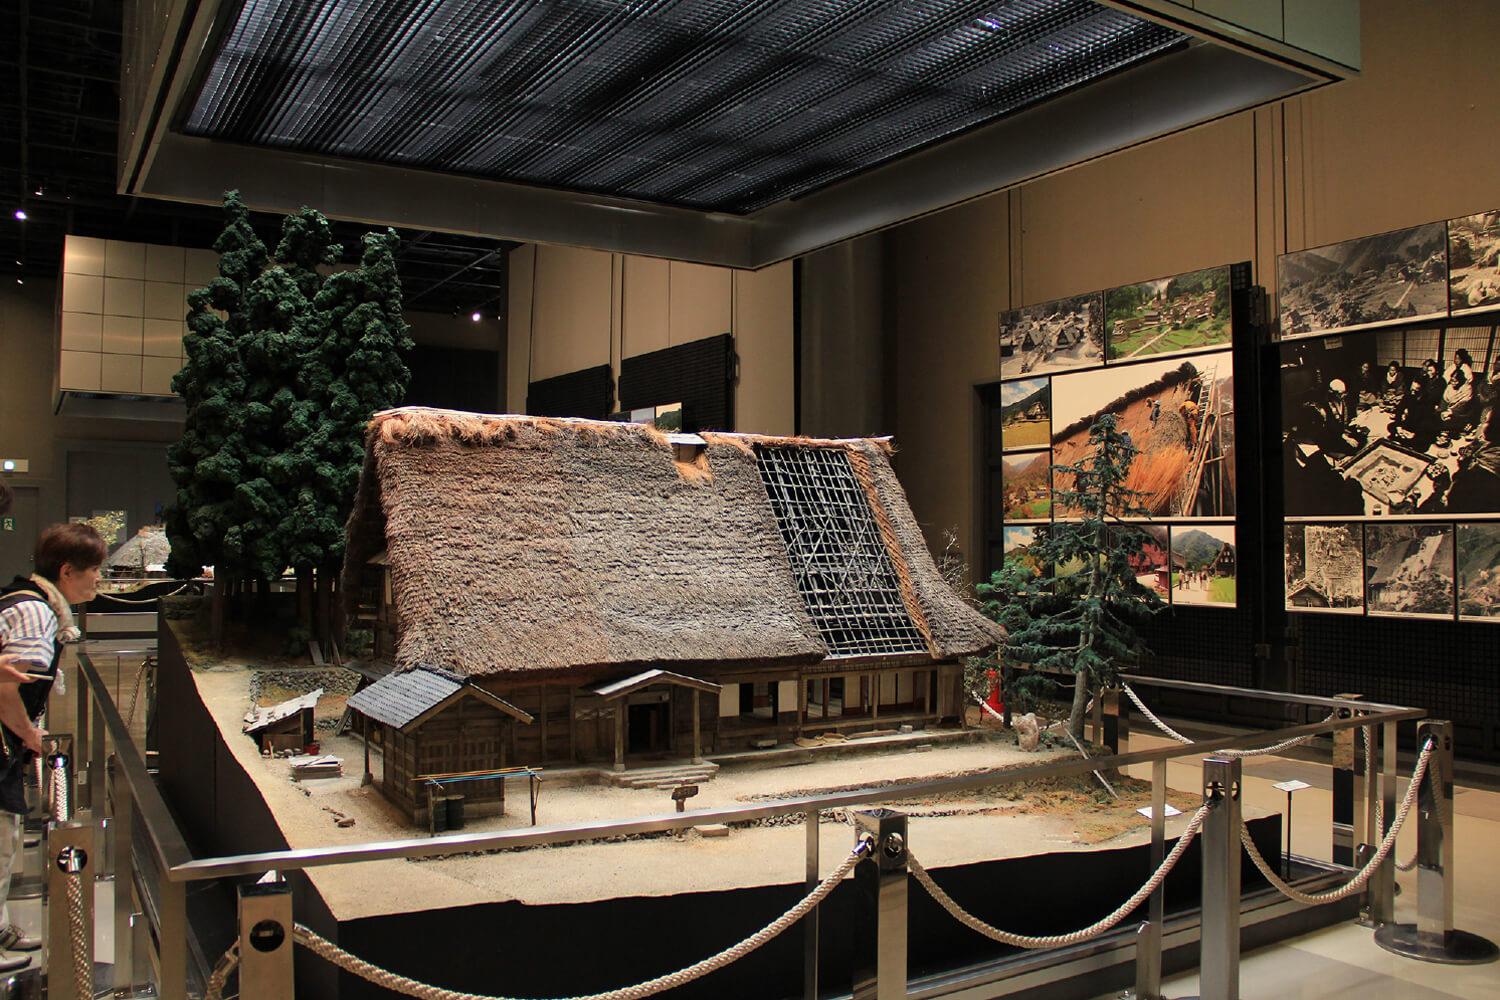 National Museum of Ethnology